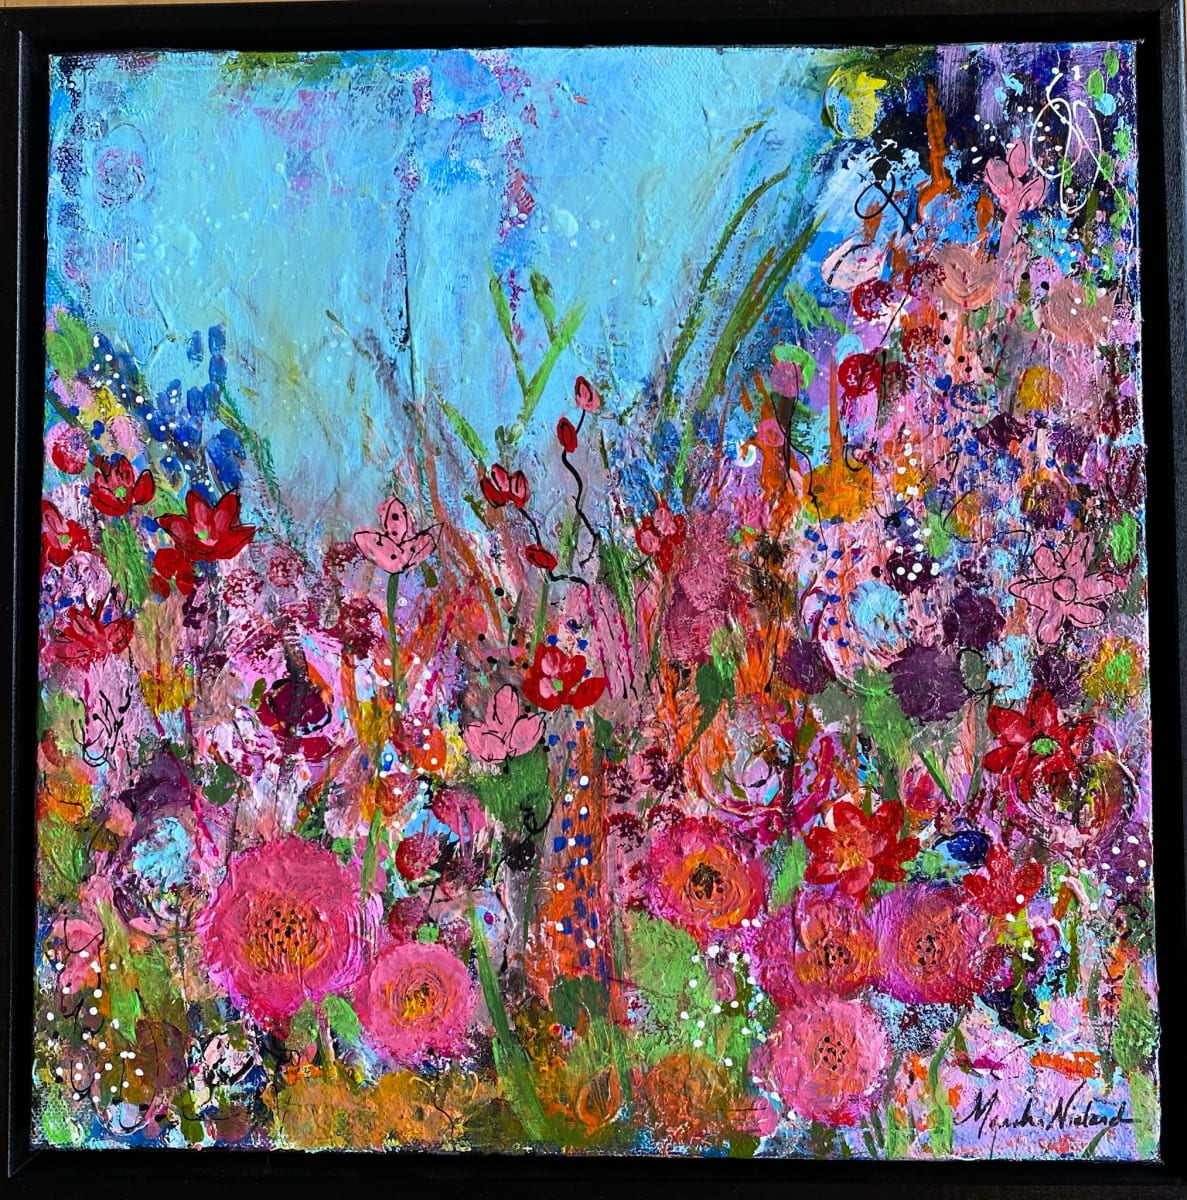 Wildflower Field 1 by Marsha Nieland  Image: Acrylic on 12x12 canvas with black floating frame.